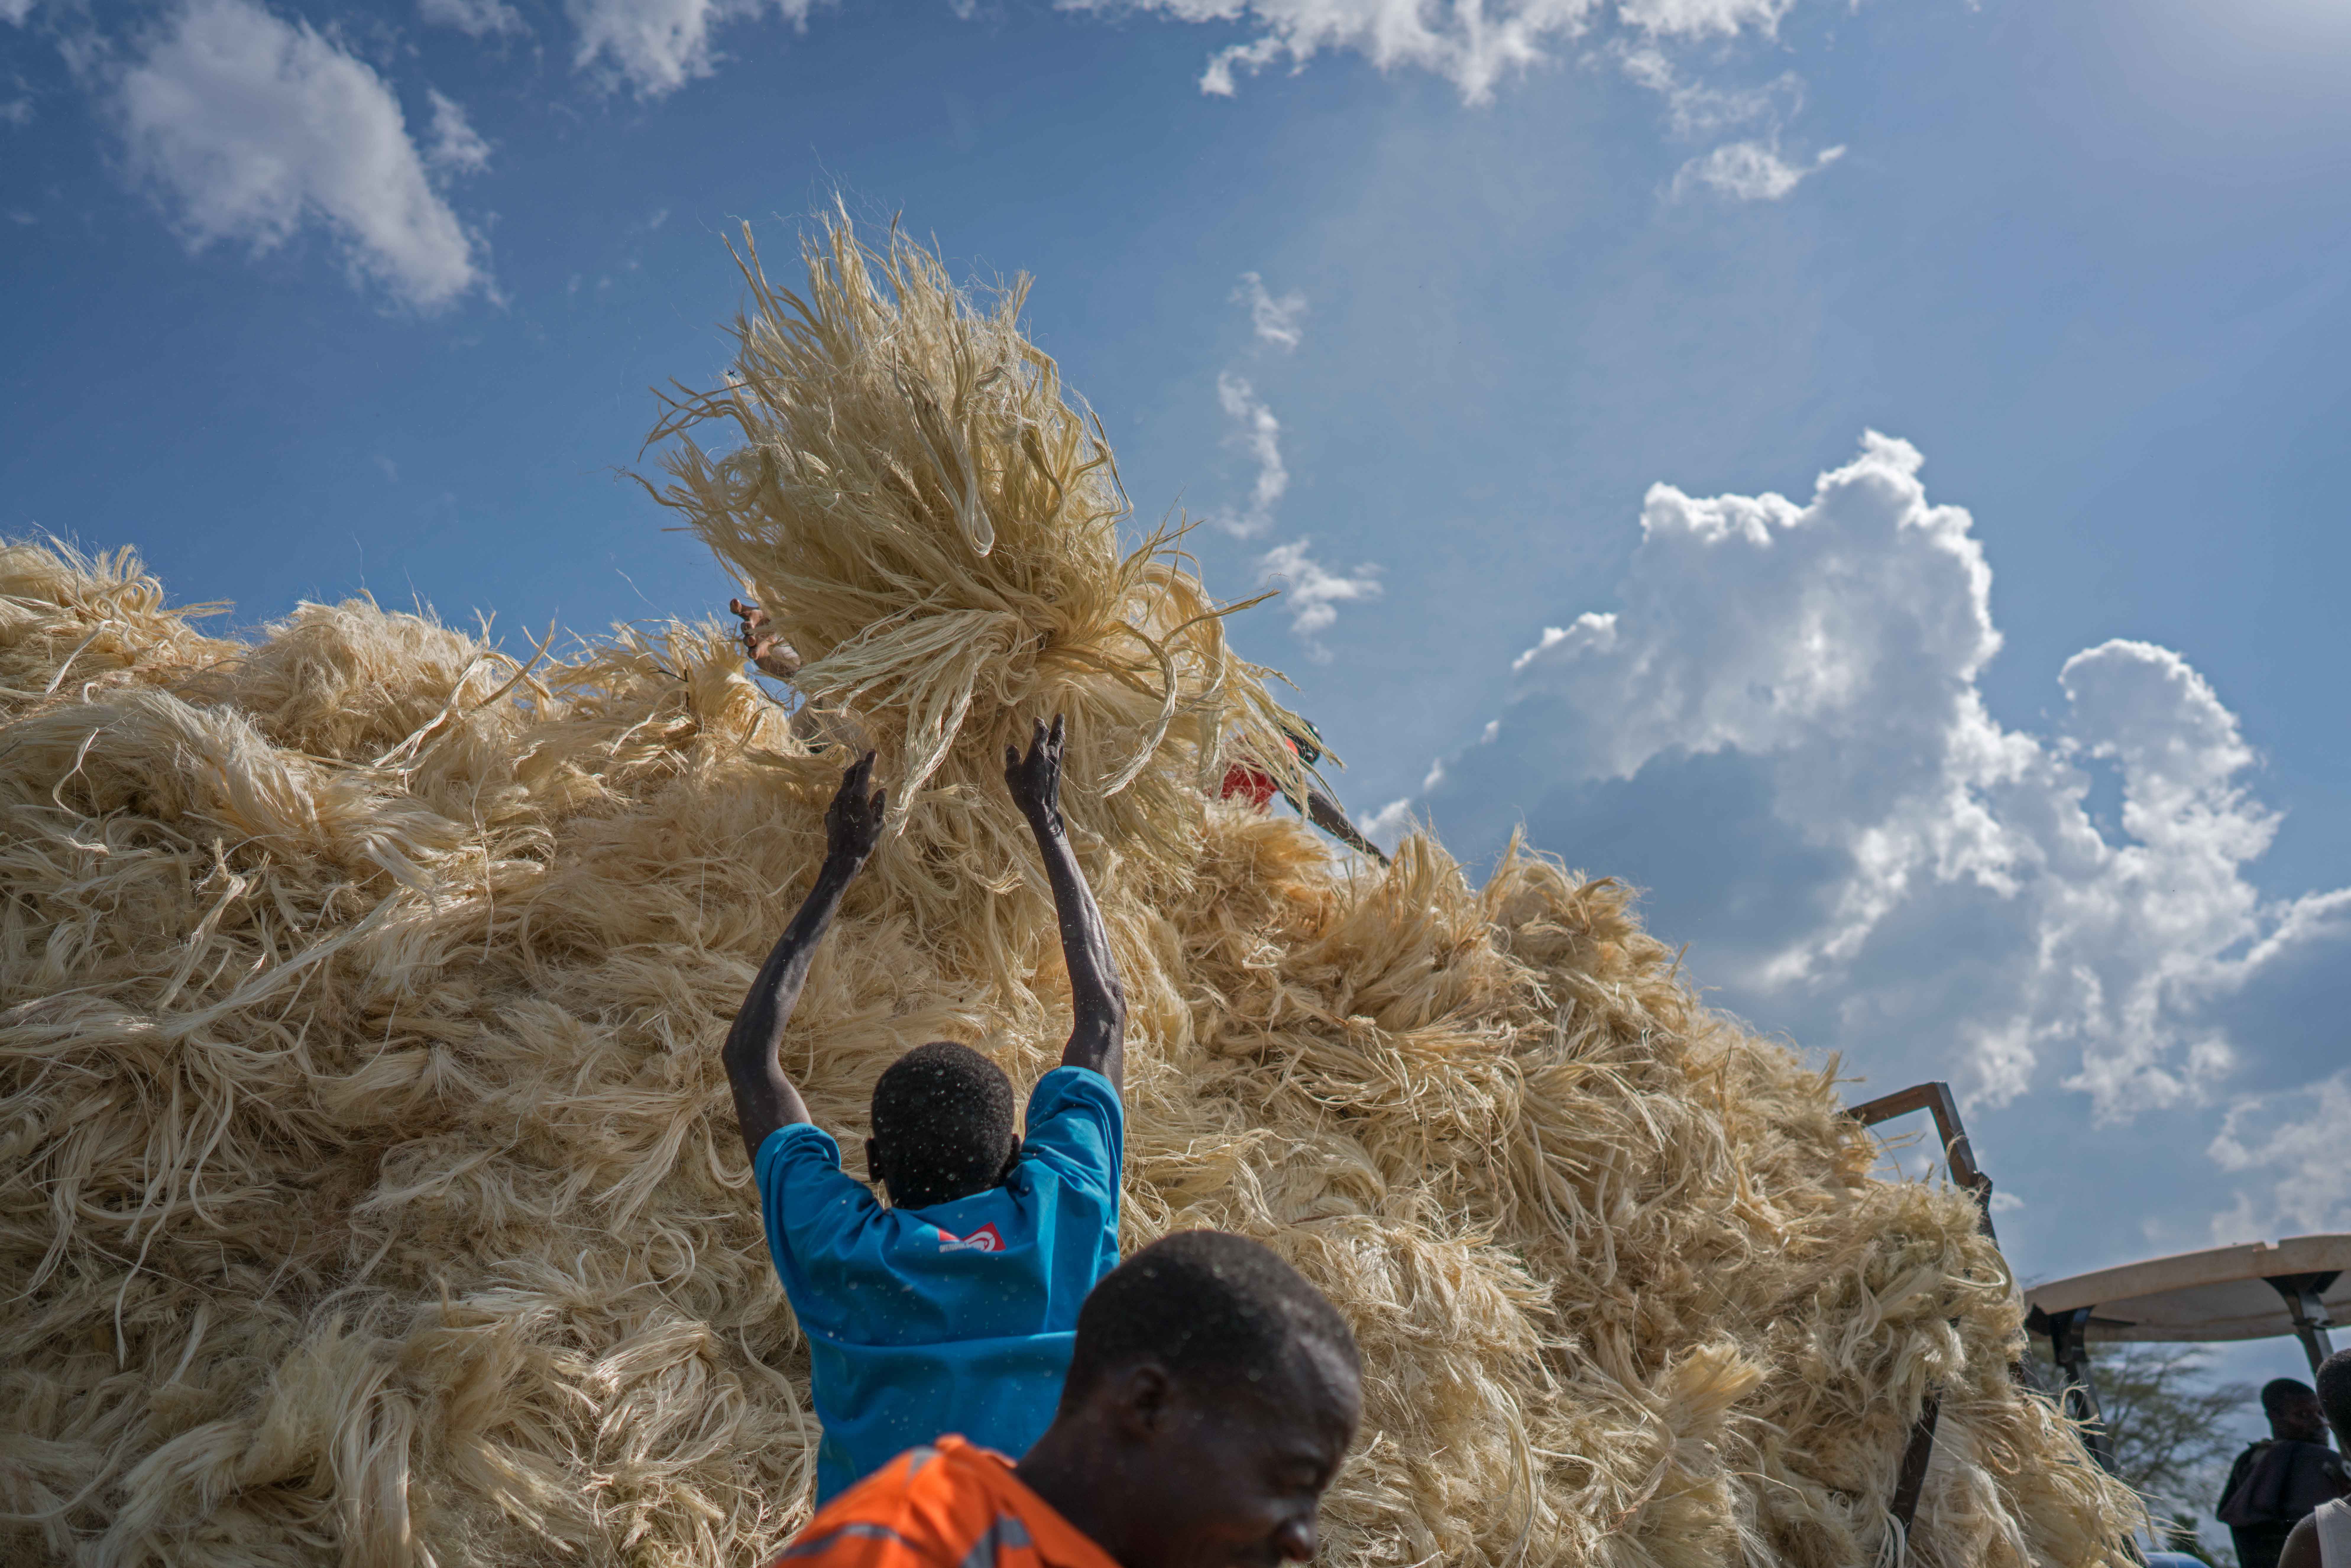 Workers process the sisal fibres